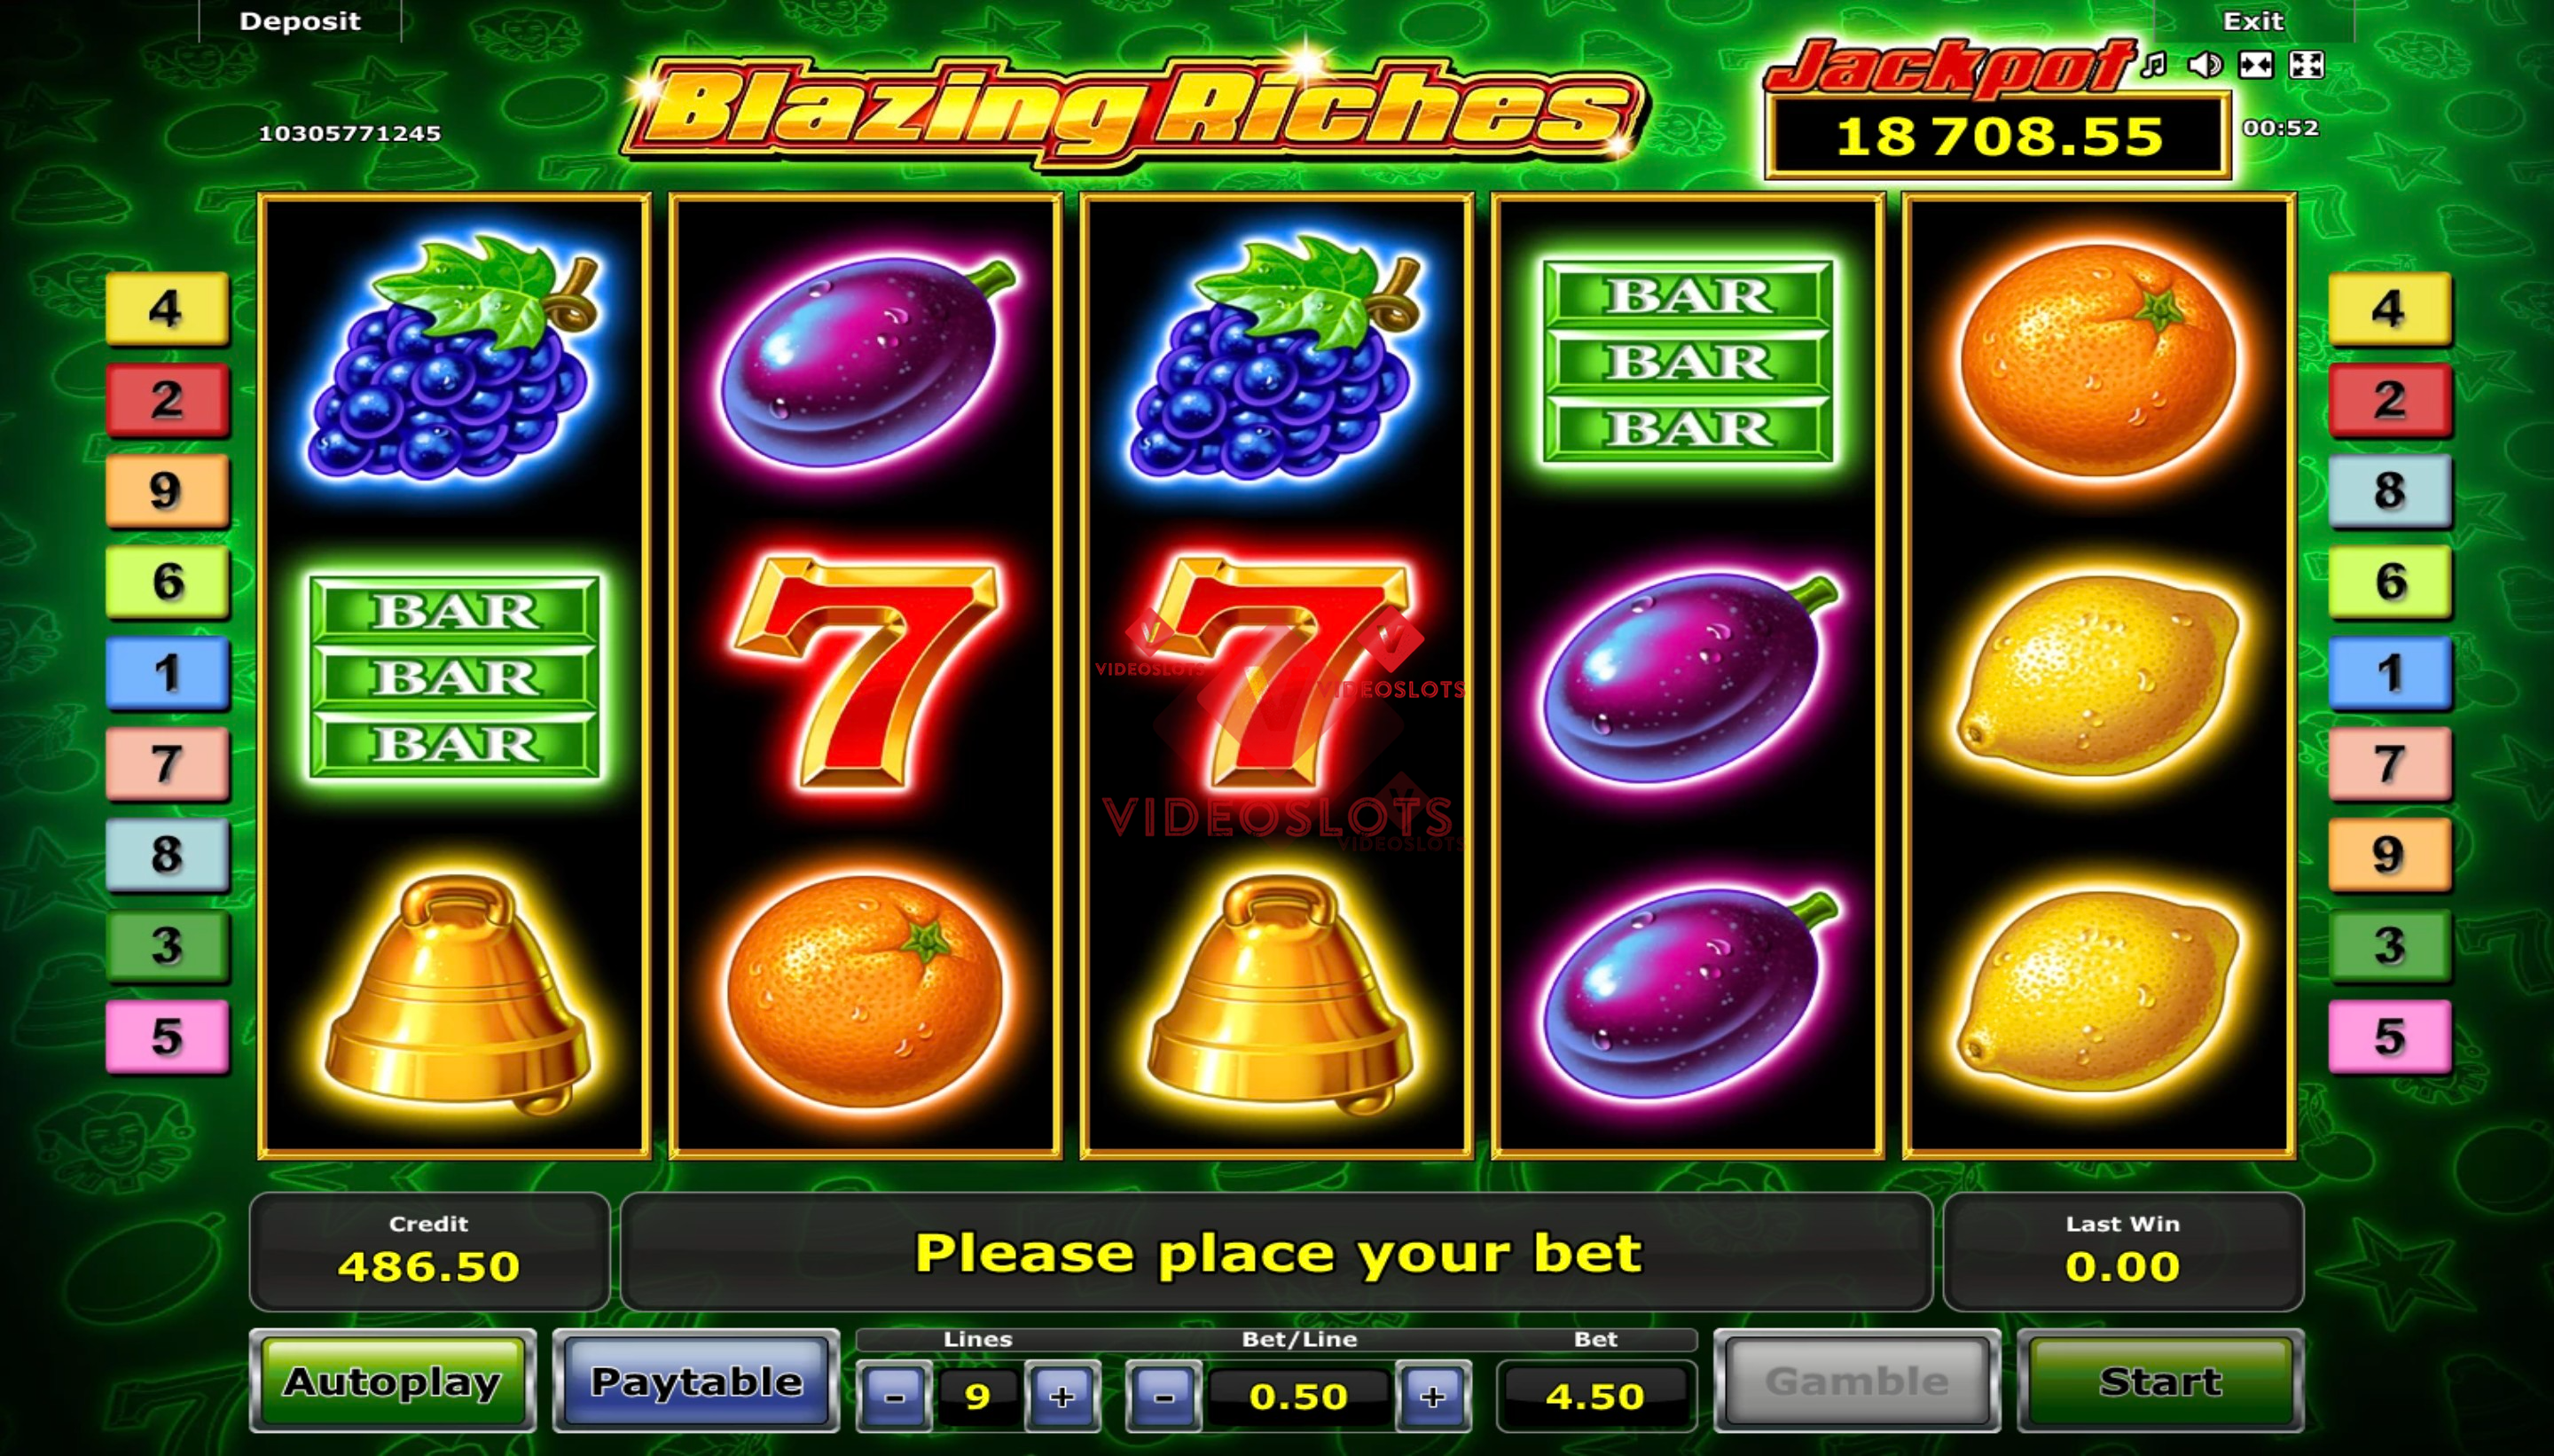 Base Game for Blazing Riches slot from Greentube